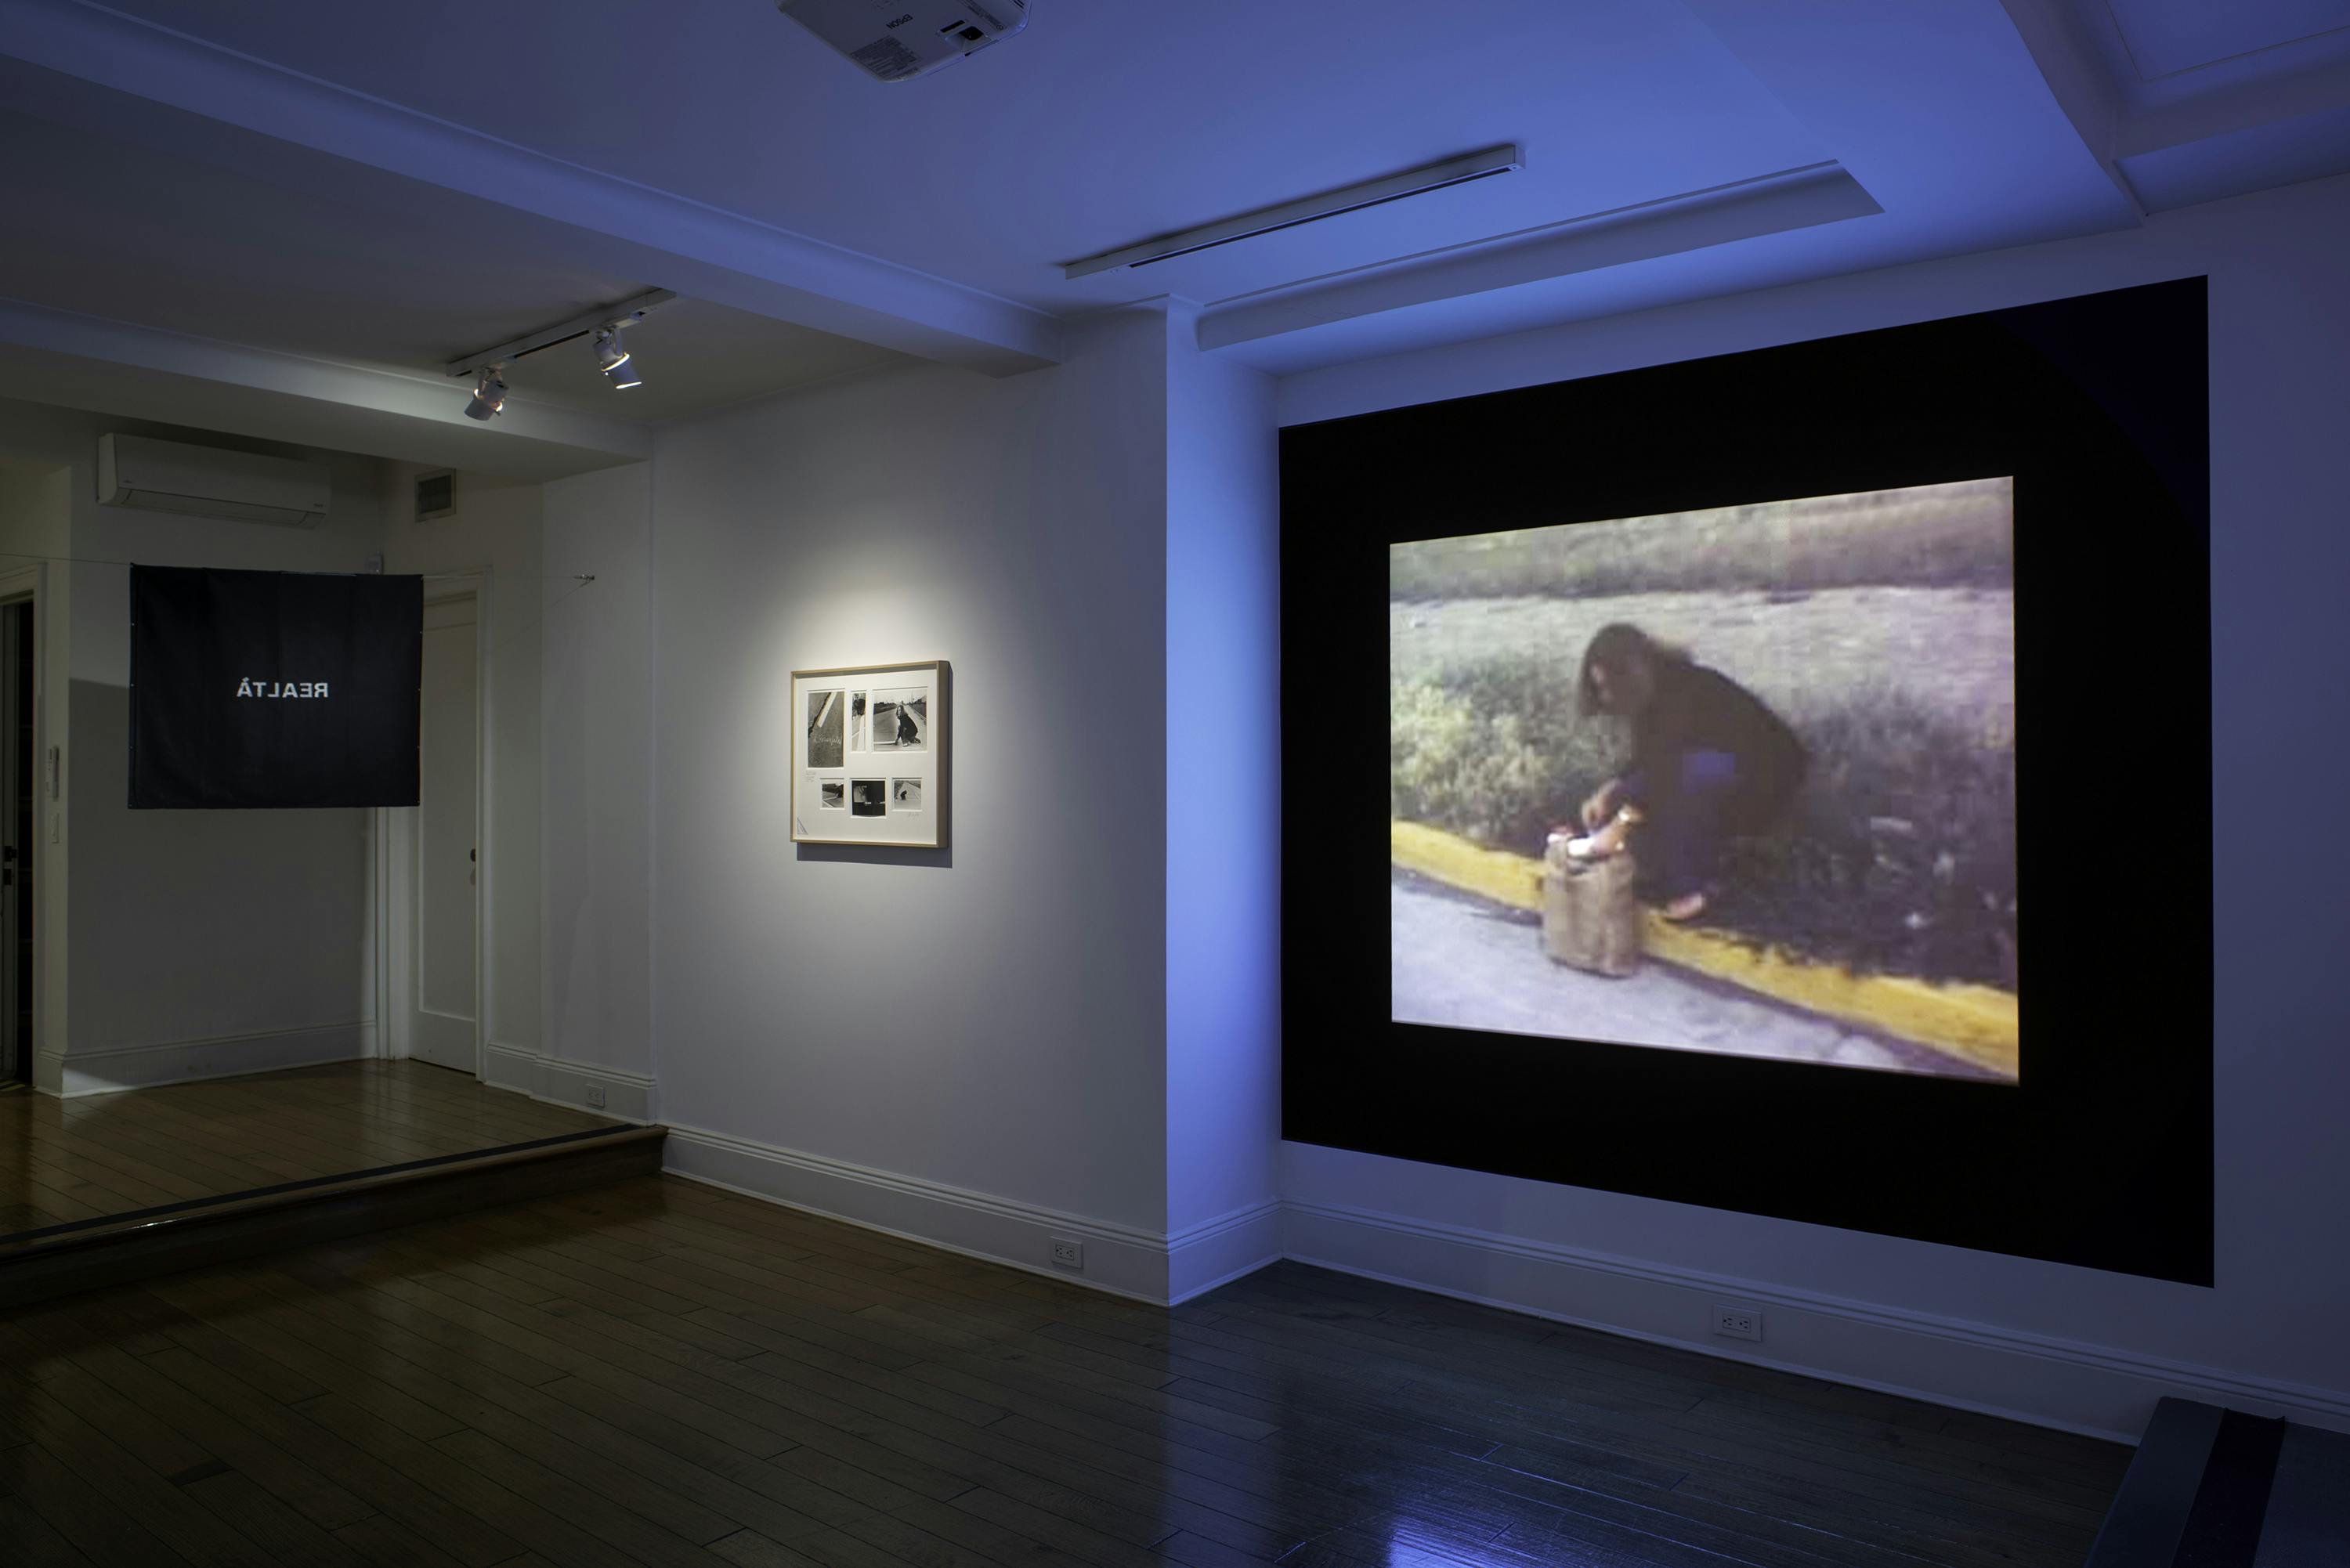 Left side view of a TV screen playing video, mounted and framed photographs, and a large video projection